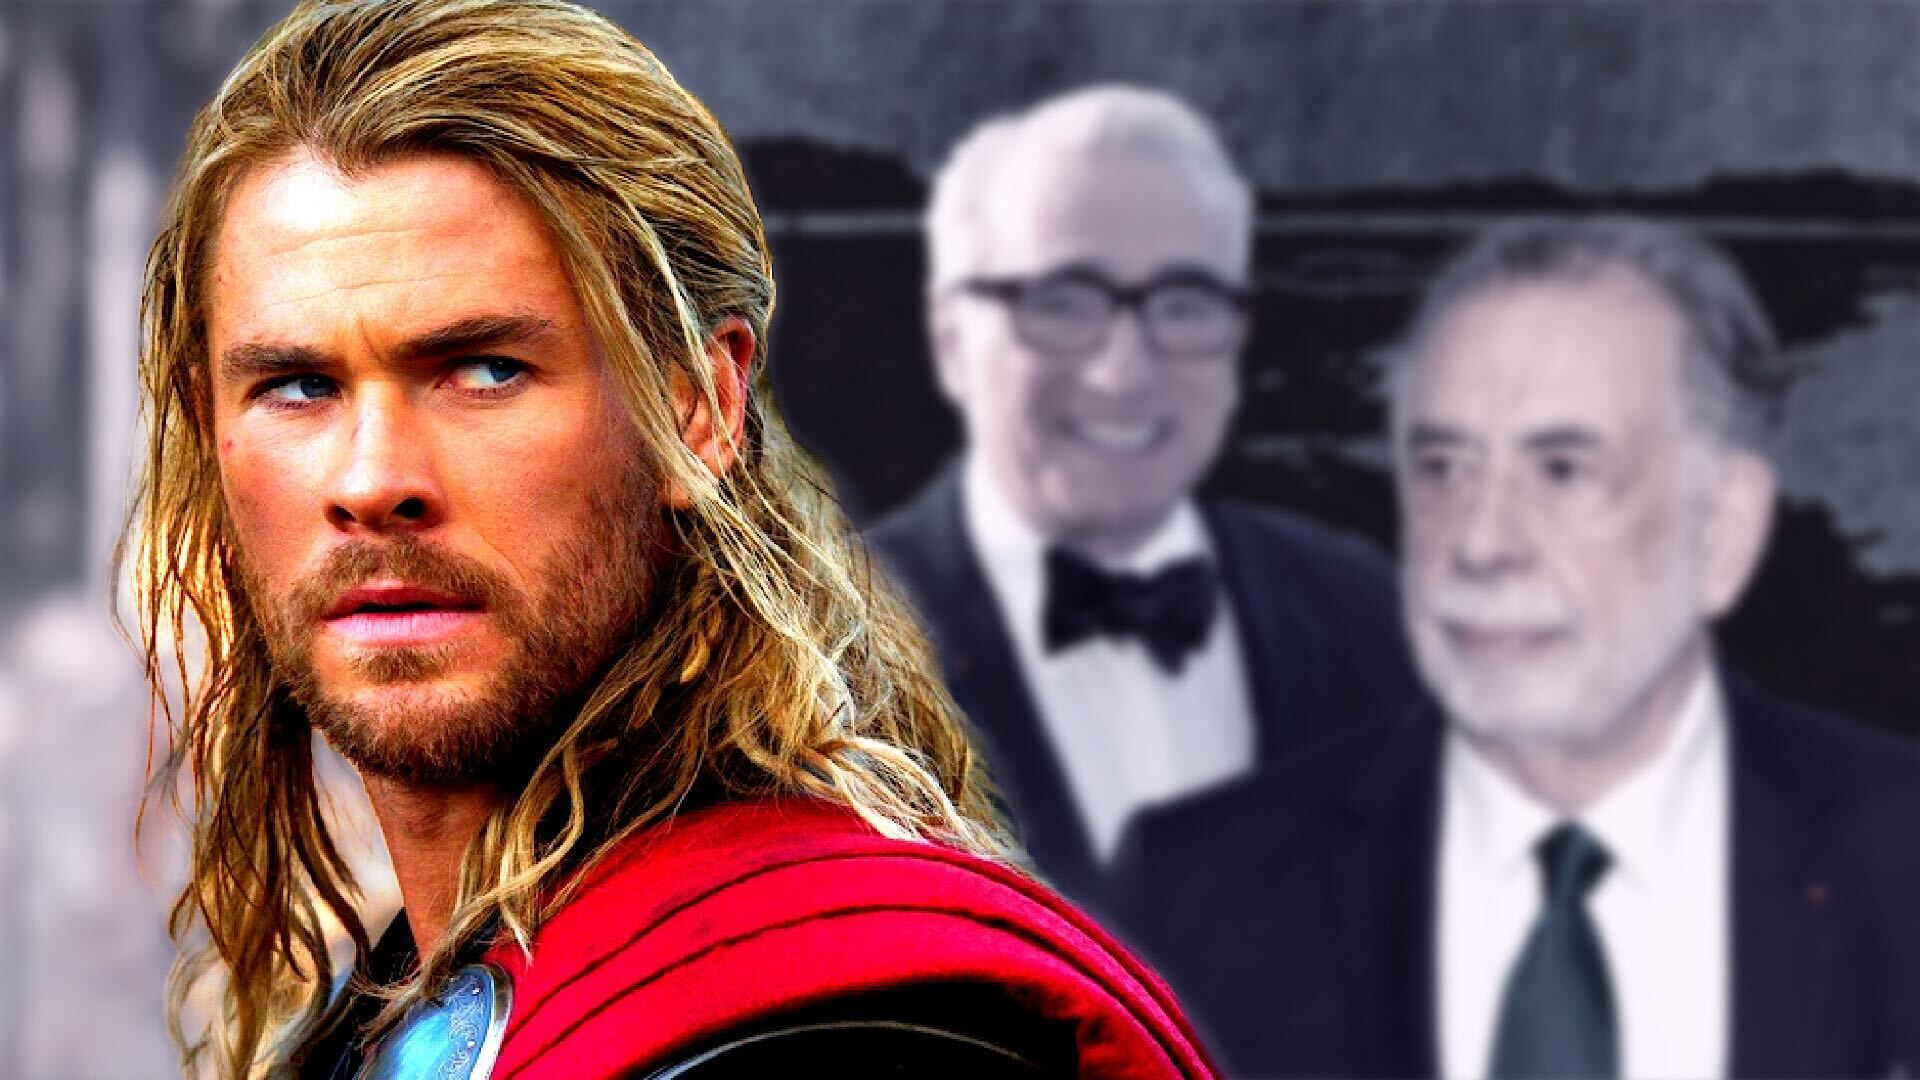 Angry Chris Hemsworth as Thor with Scorsese and Ford Coppola in the background